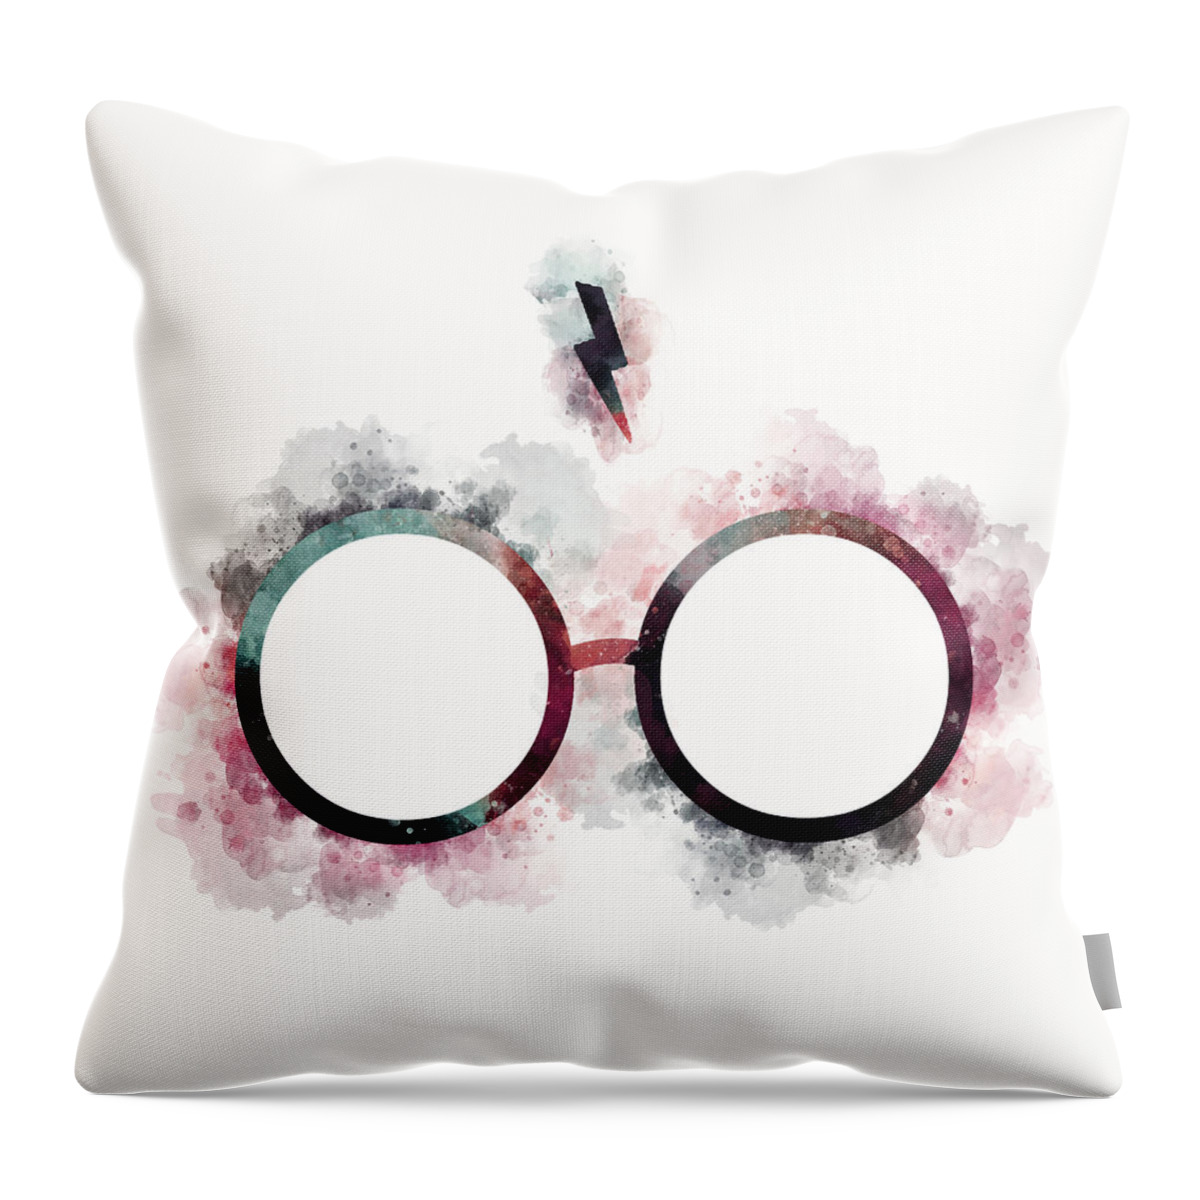 Harry Potter Throw Pillow featuring the digital art Harry Potter Glasses Watercolor II by Ink Well